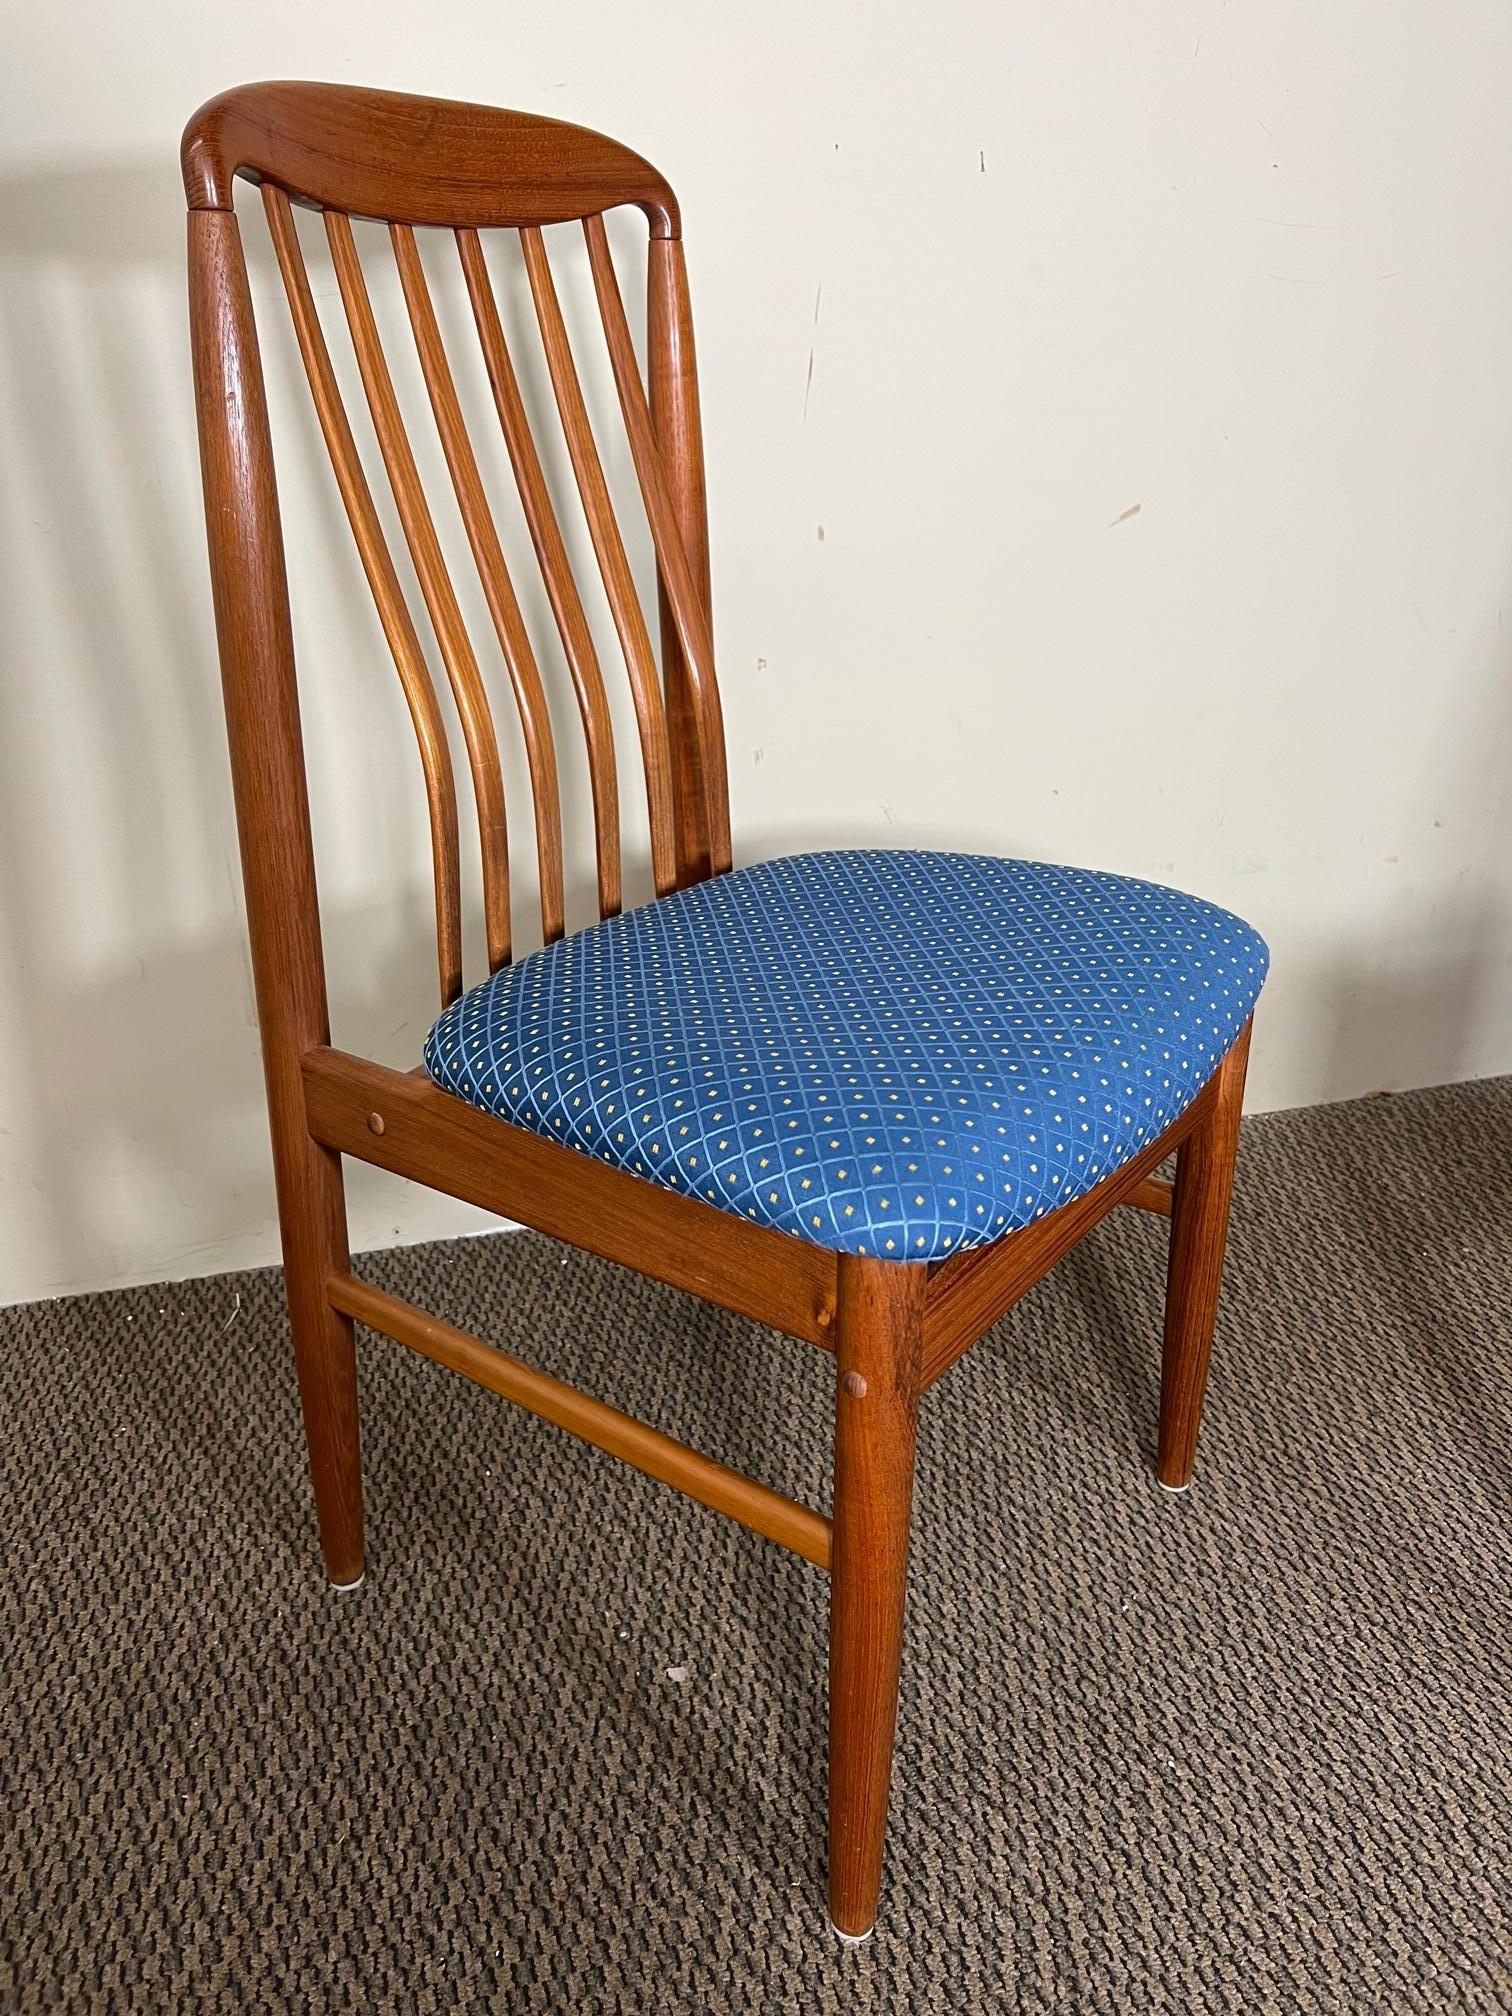 Beautiful set of 6 teak dining chairs by Benny Linden with slatted back.

Excellent condition. All the chairs are very sturdy. Recently reupholstered. One chair has been glued.

Dimensions: 18